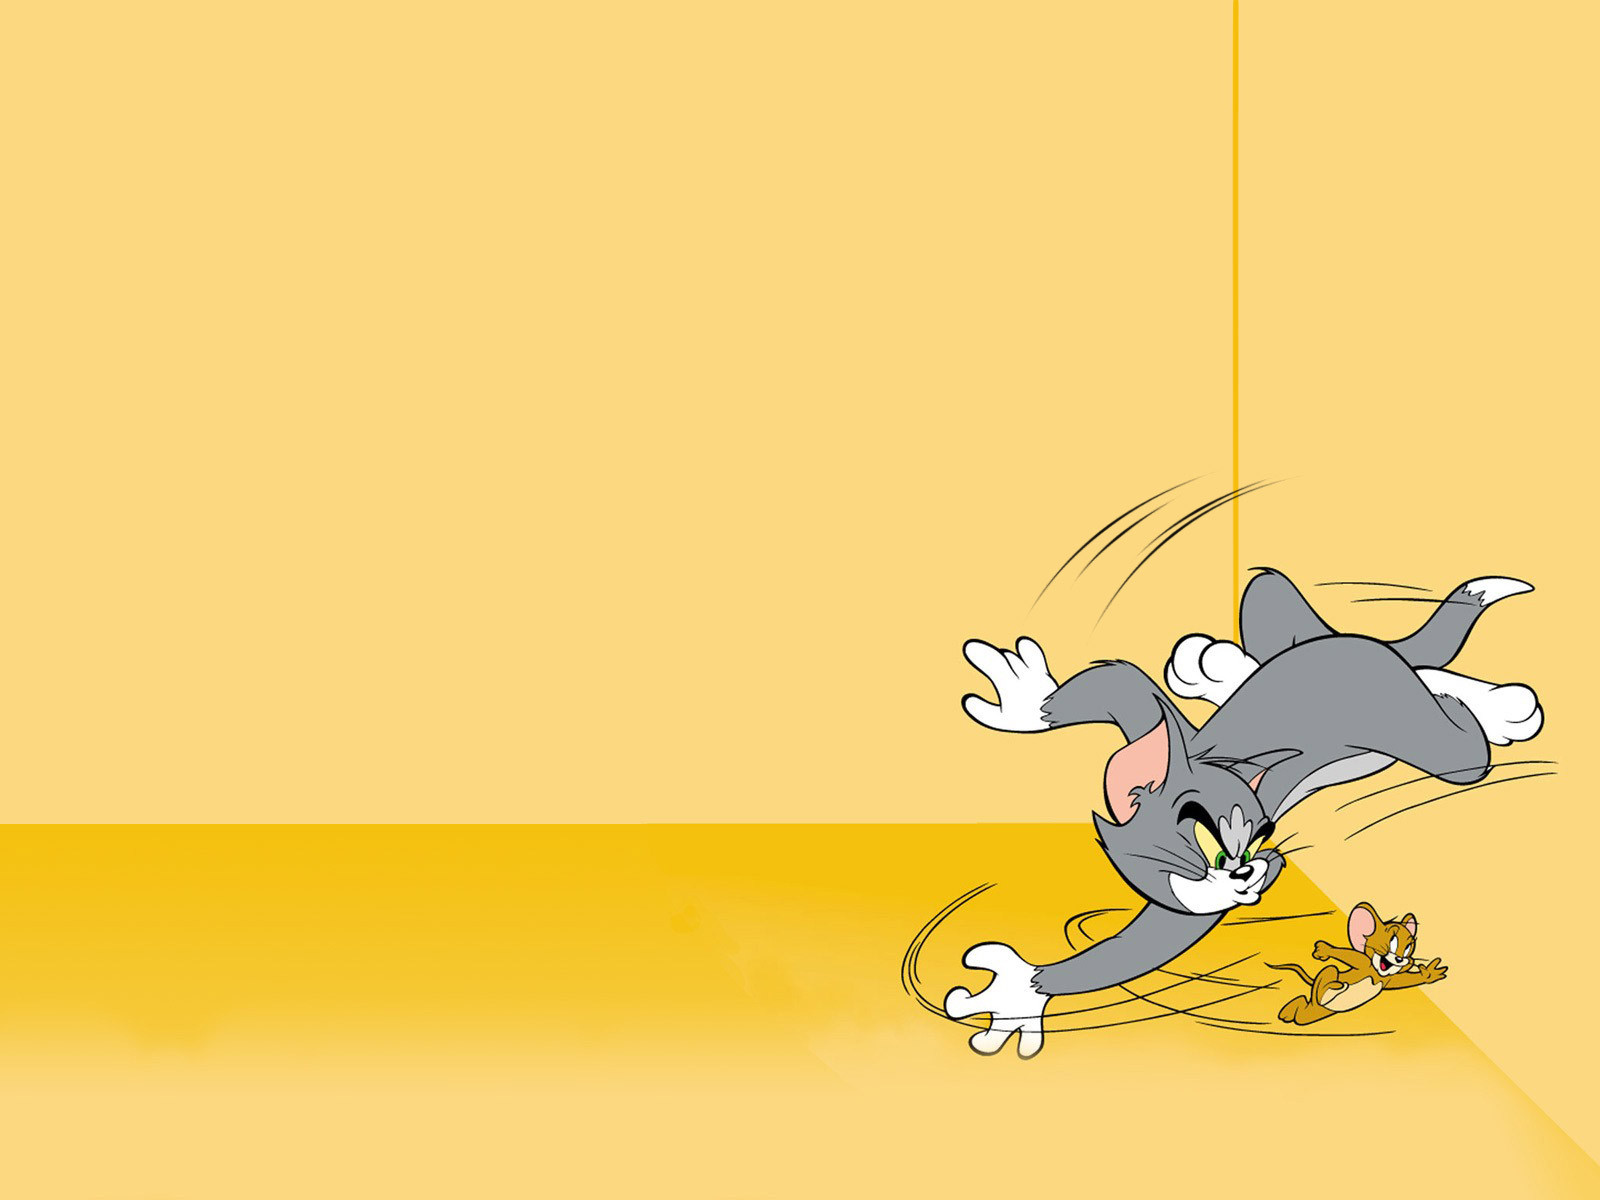  Cartoon PPT Background Tom and Jerry Cartoon ppt backgrounds Tom and